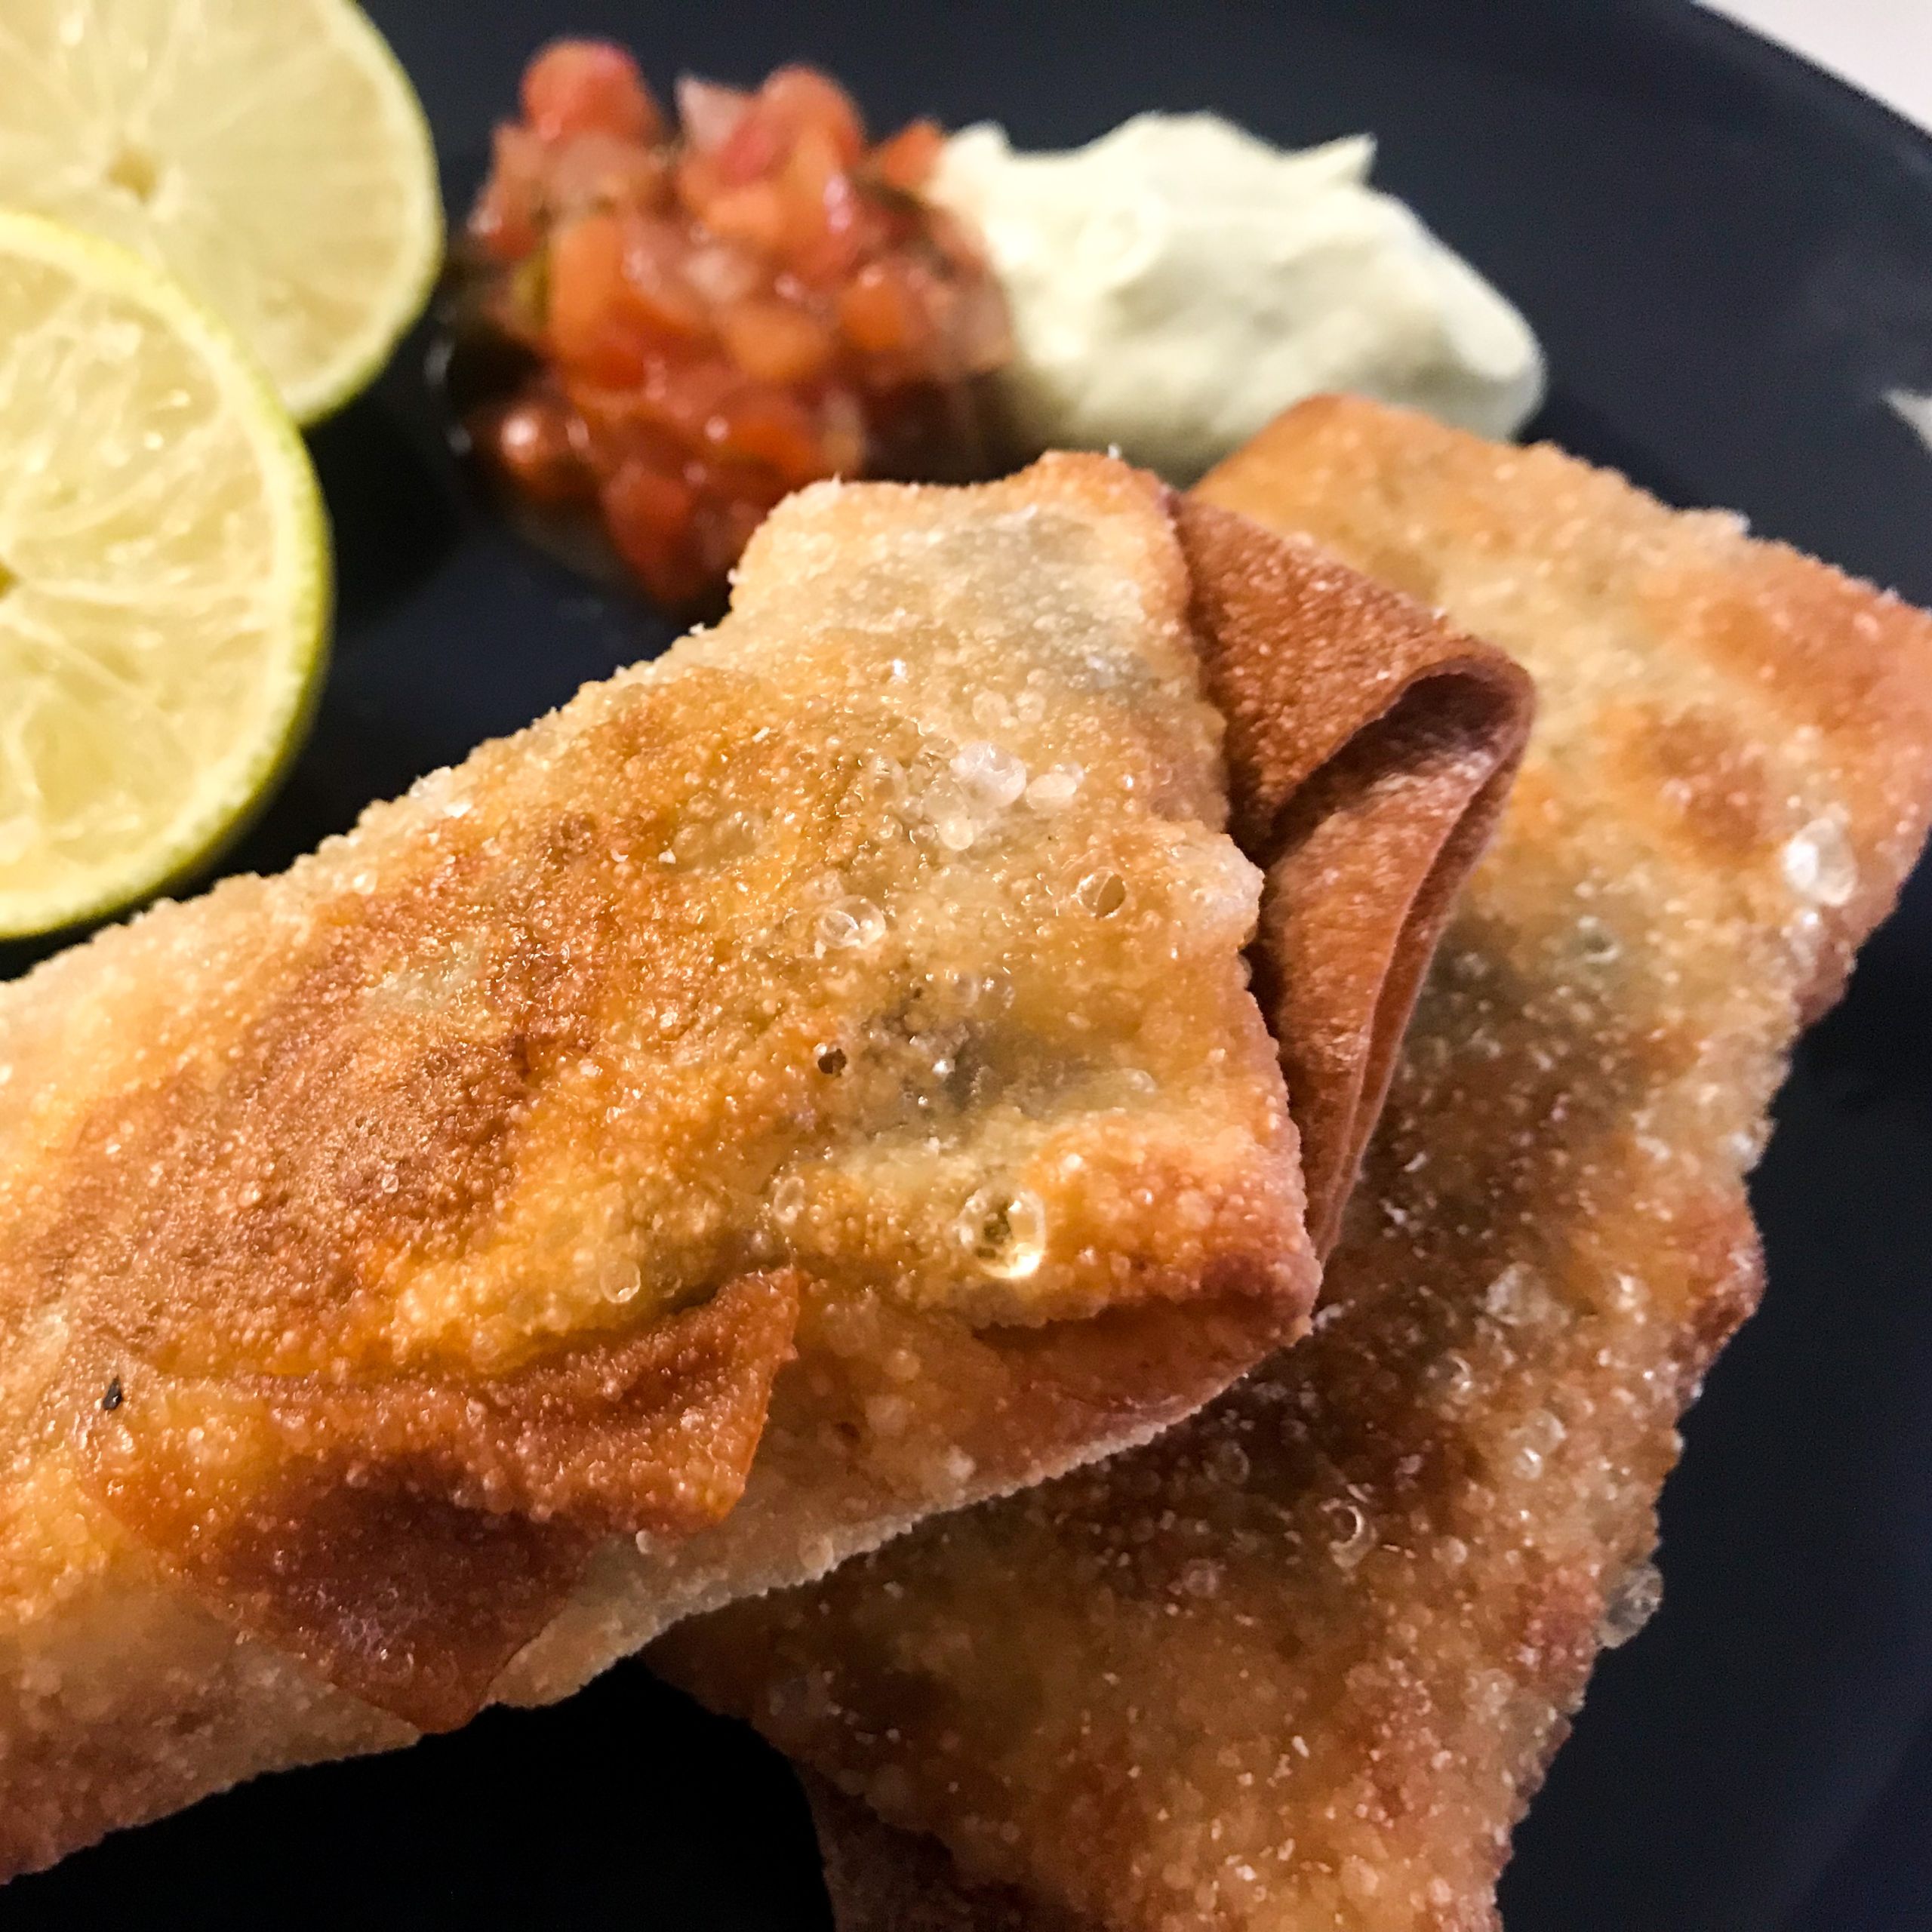 fried southwest egg rolls on plate with lime, salsa and crema | my curated tastes